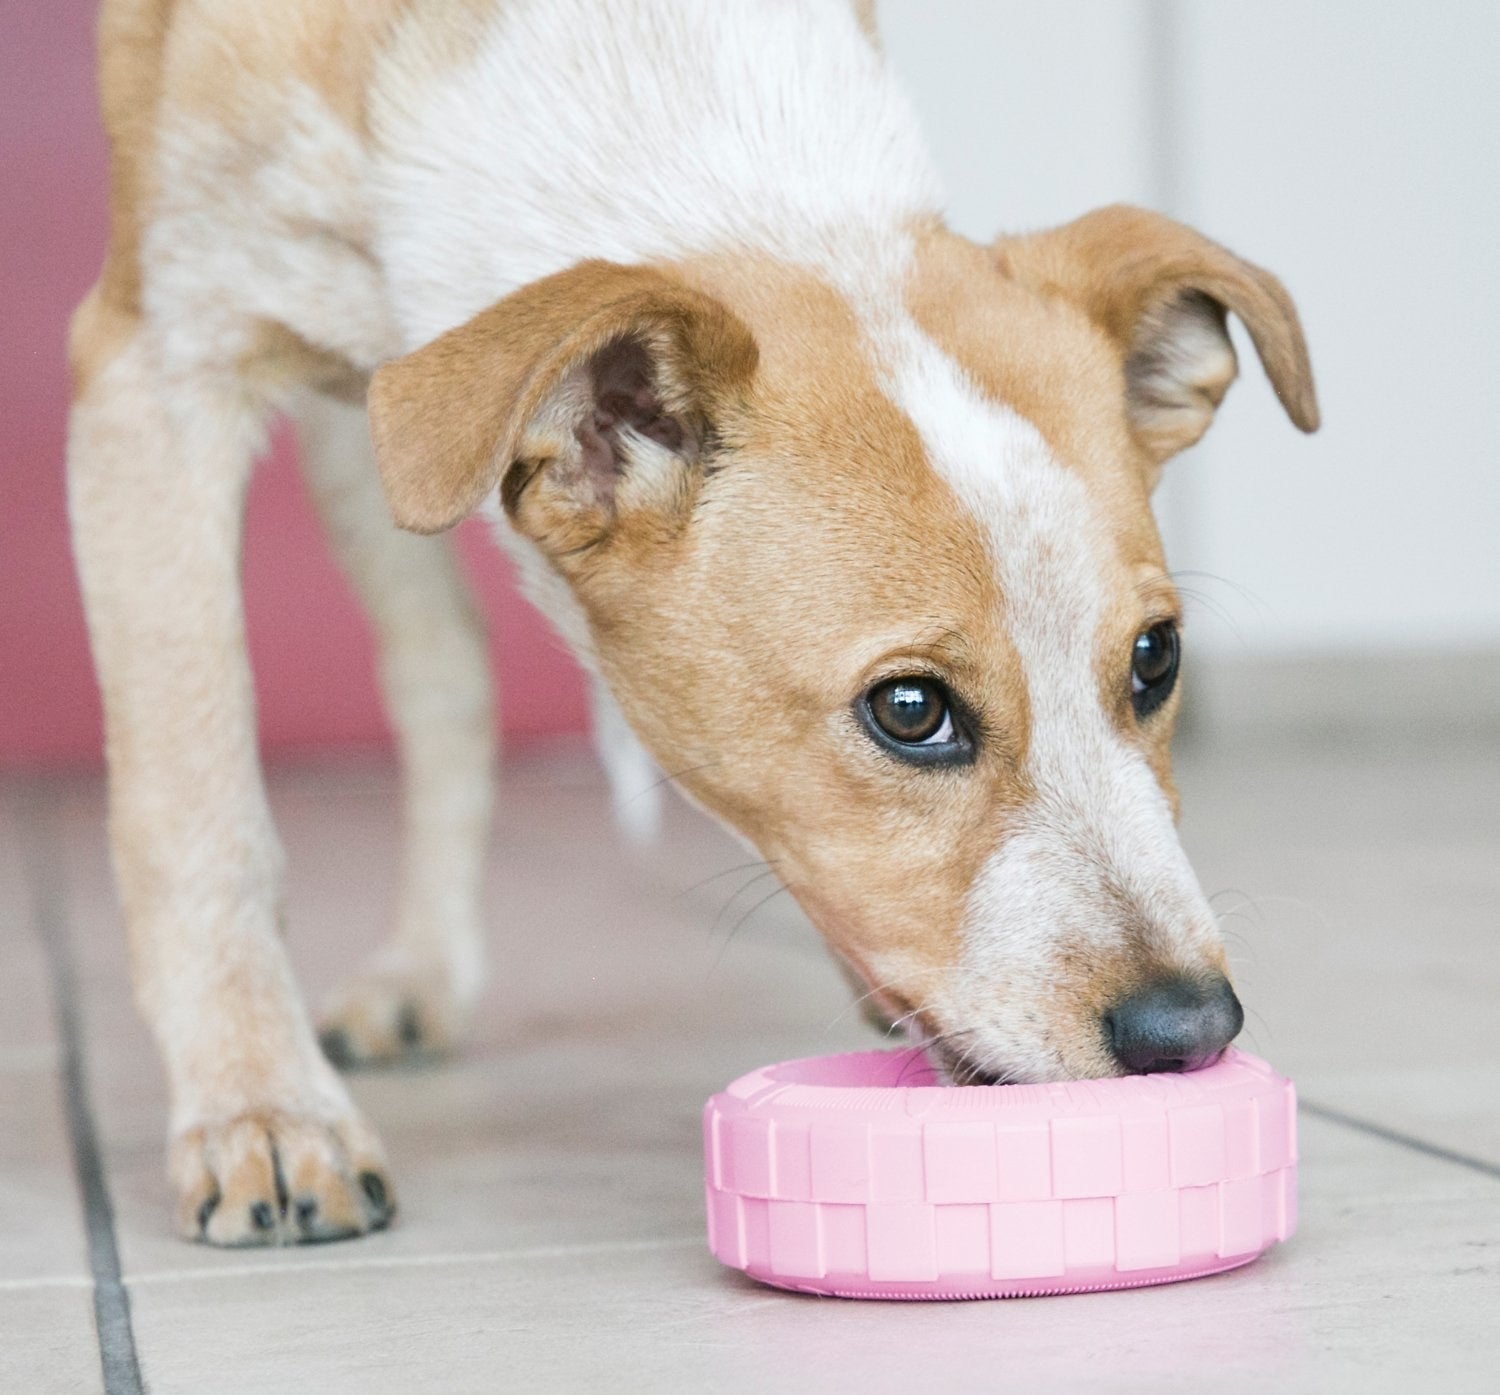 Dog chewing on pink tire-inspired chew toy